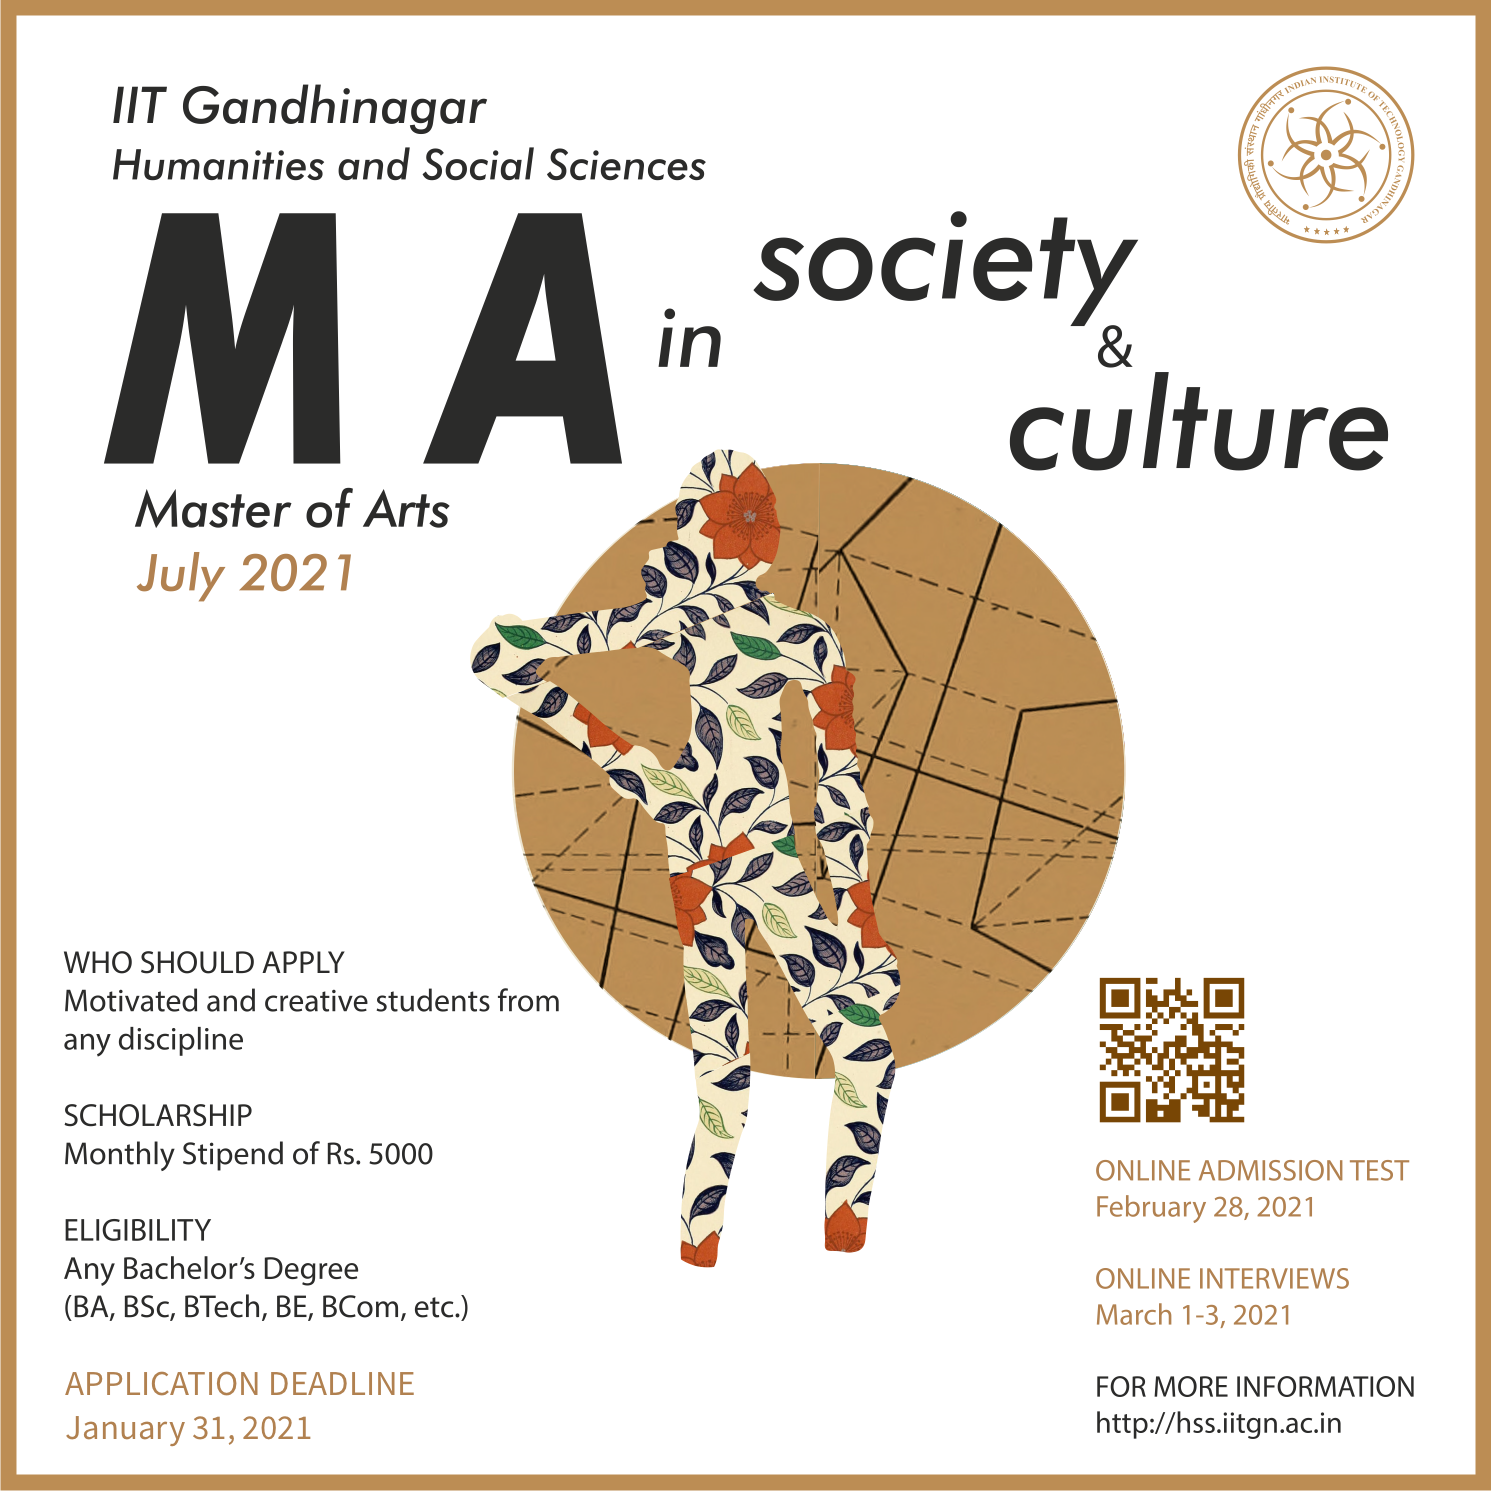 IIT Gandhinagar - IIT Gandhinagar is happy to announce that admissions to  its Masters in Society and Culture 2020 is open now! The admission test and  interview dates to be locked in